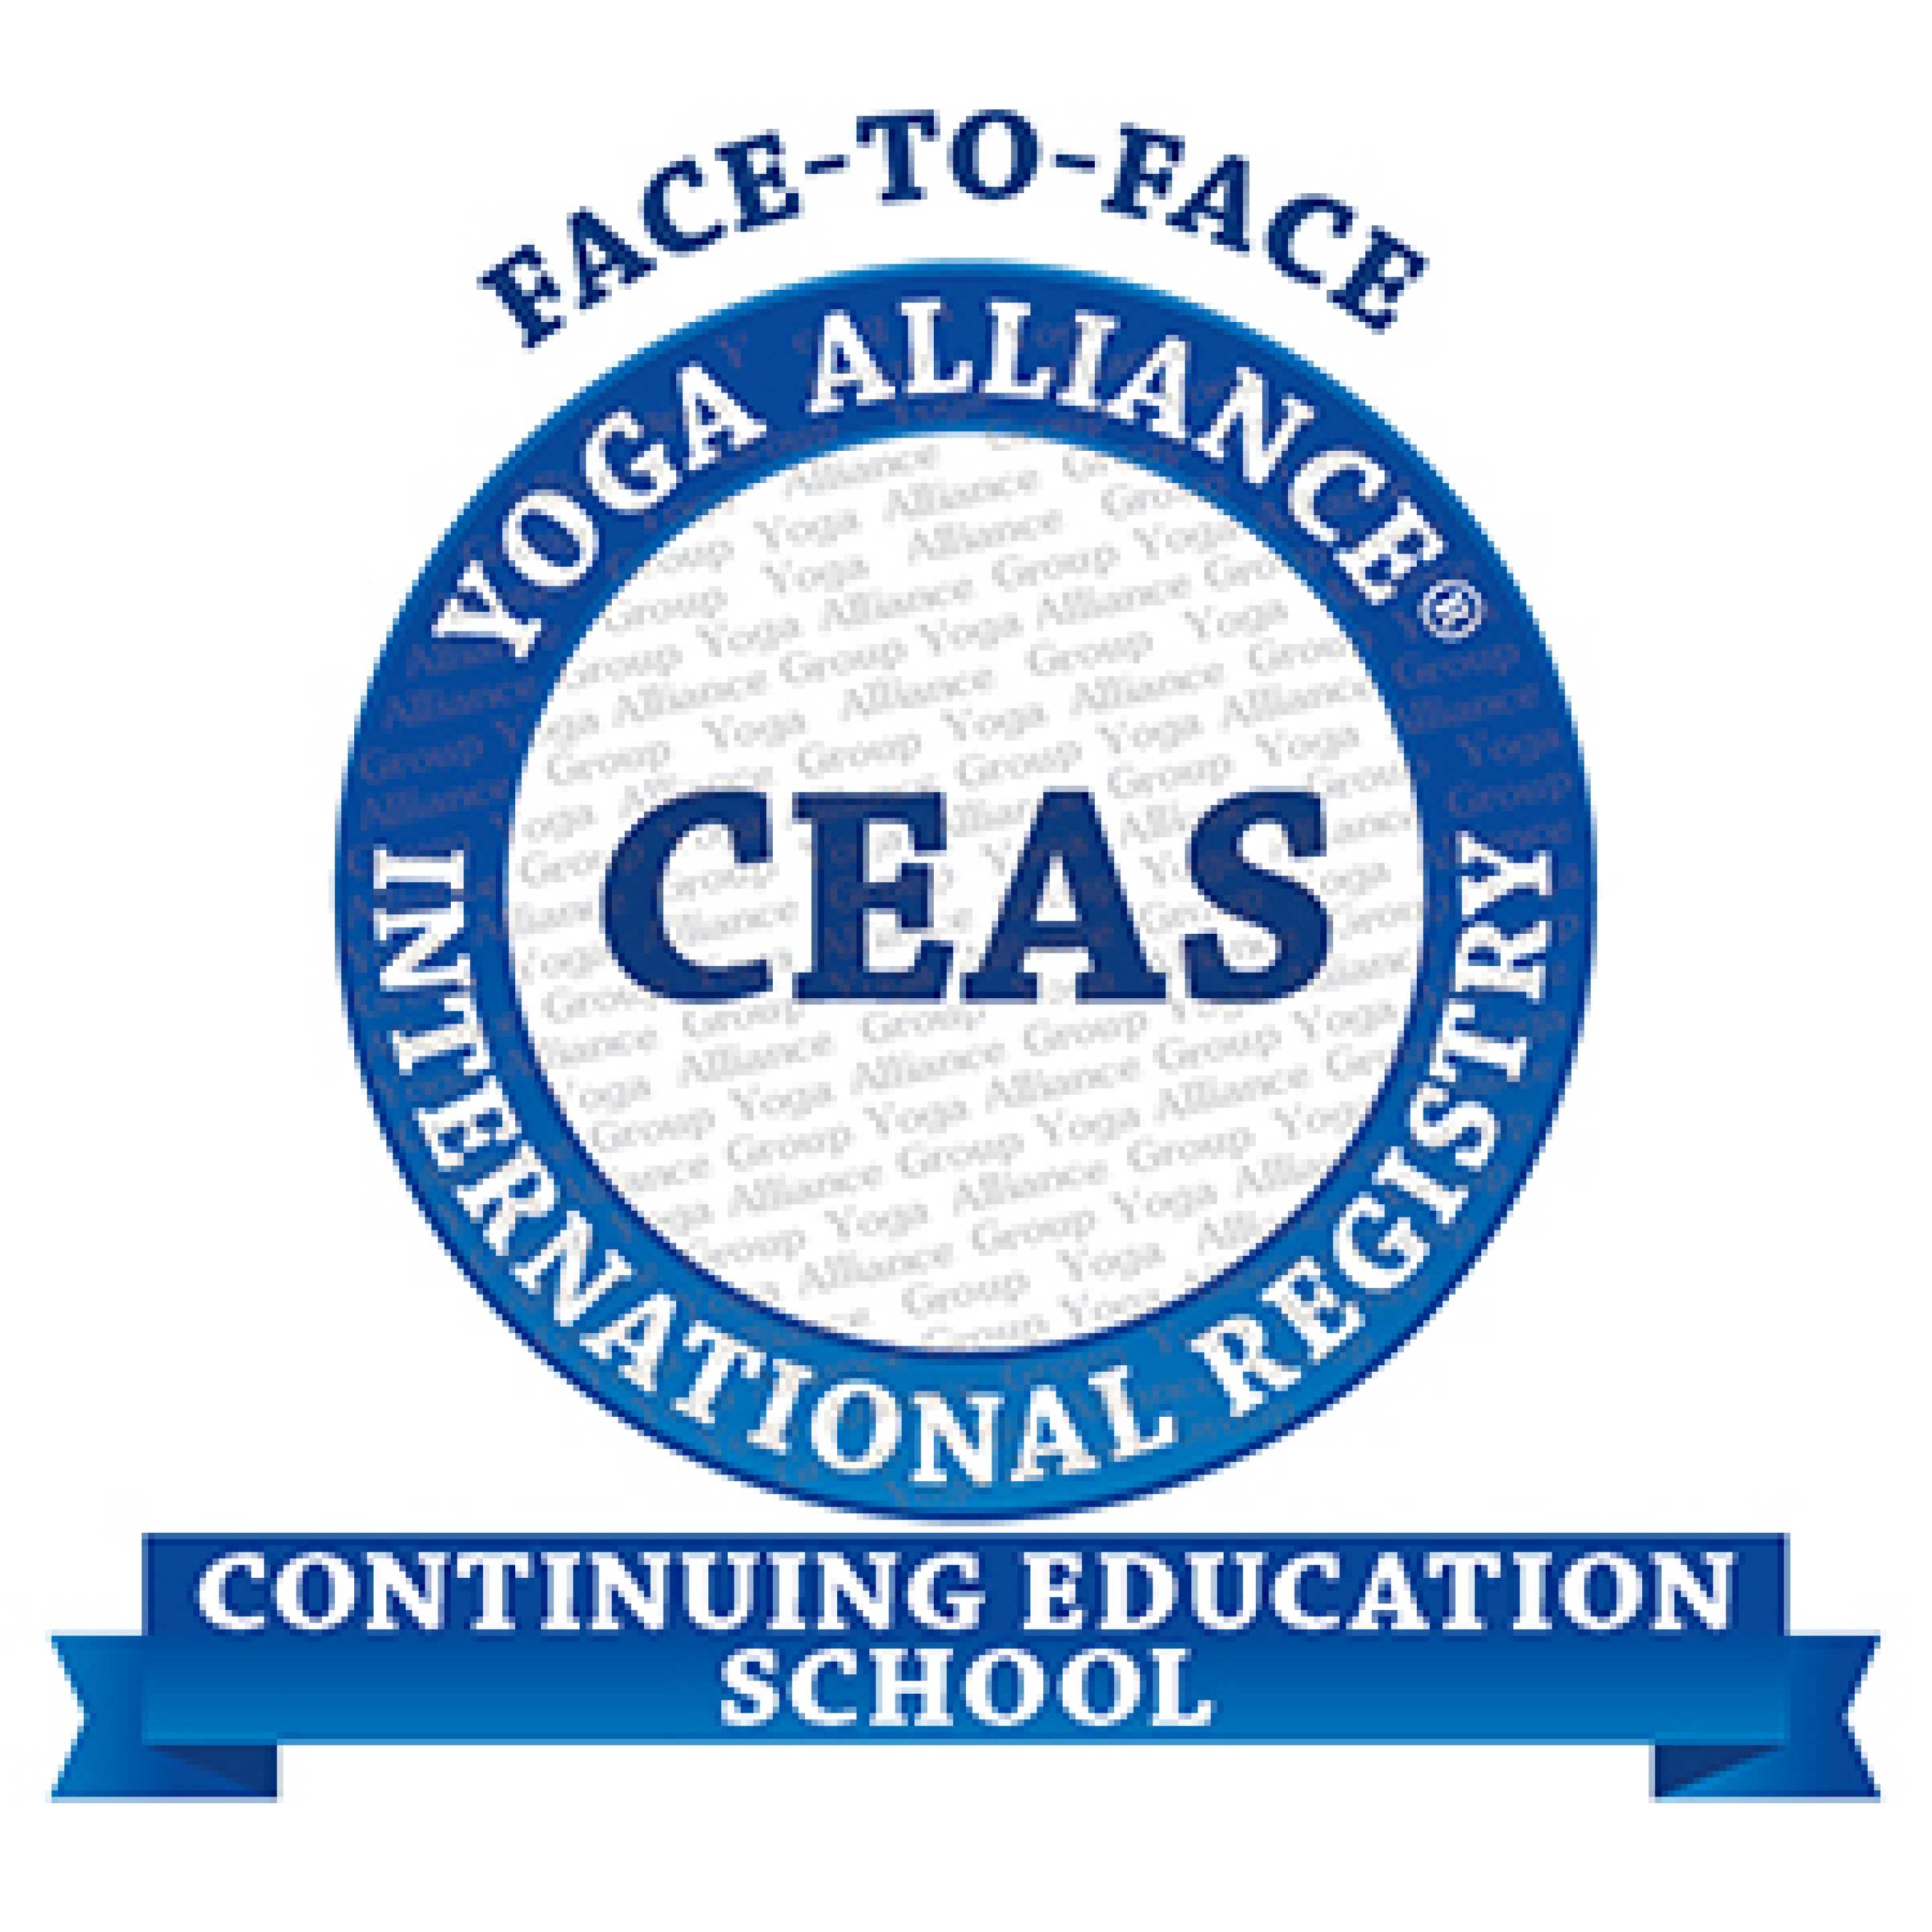 Yoga Alliance International Registry: Face to Face Continuing Education School